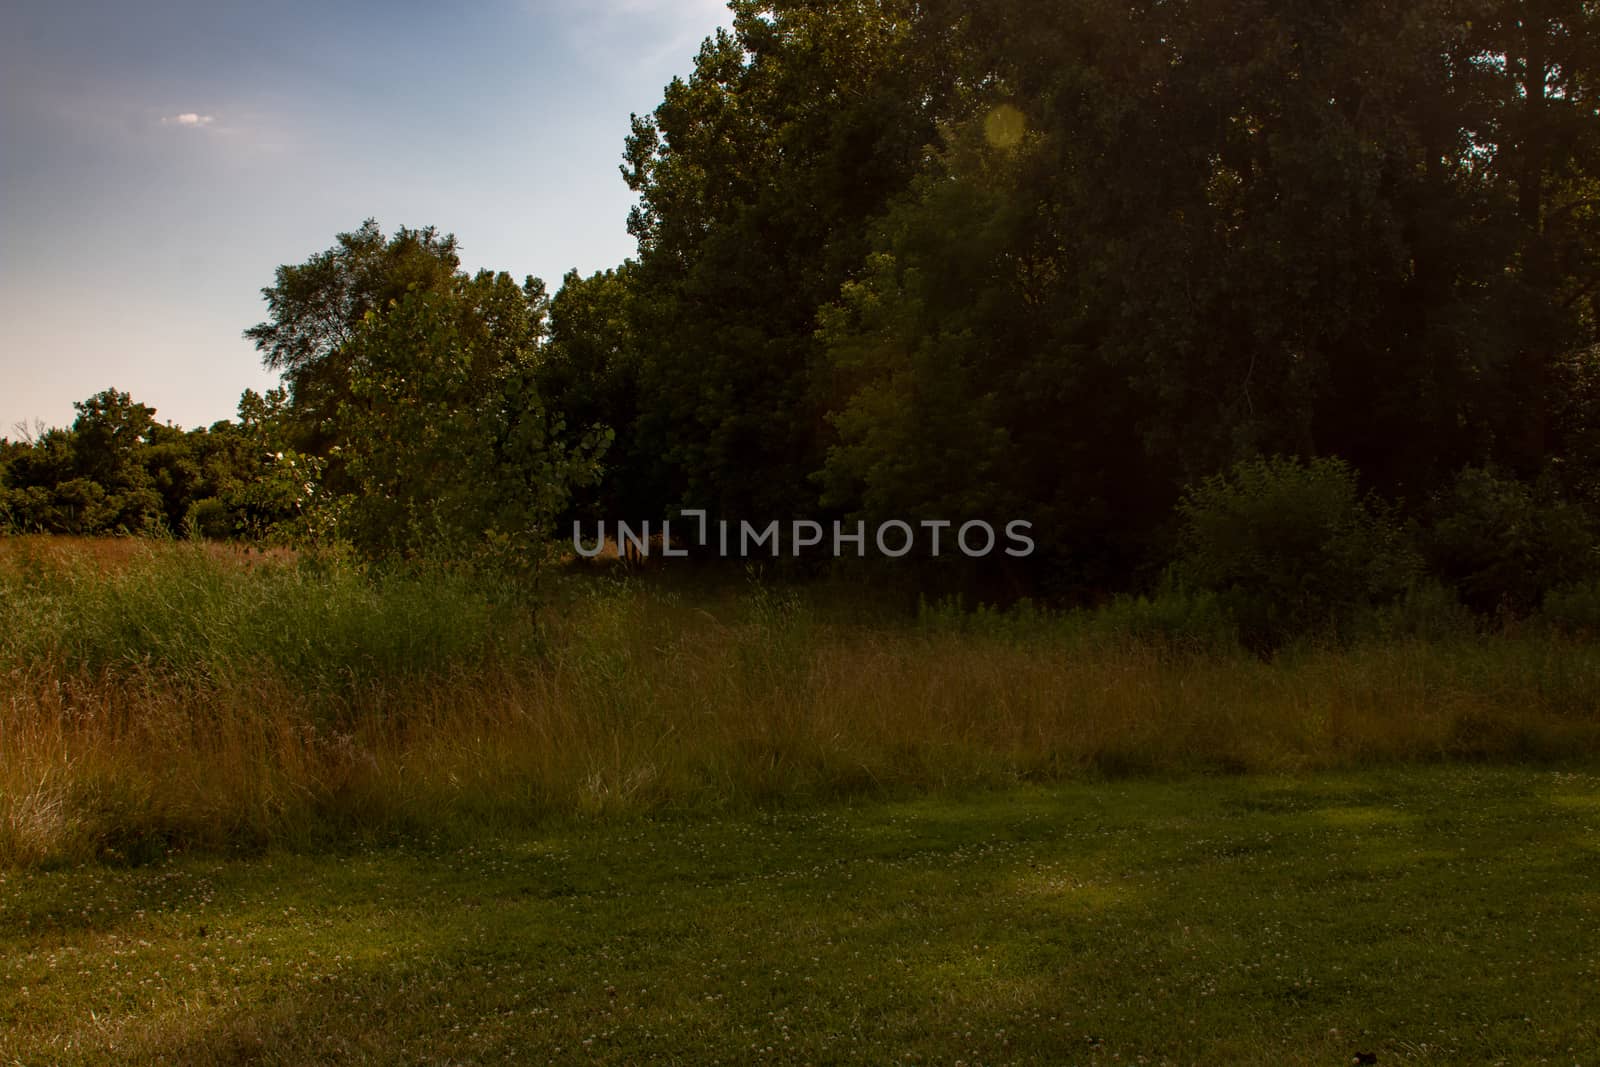 Long grass landscape type photo. Room for copy space. Photo shows beauty of Ontario nature by mynewturtle1